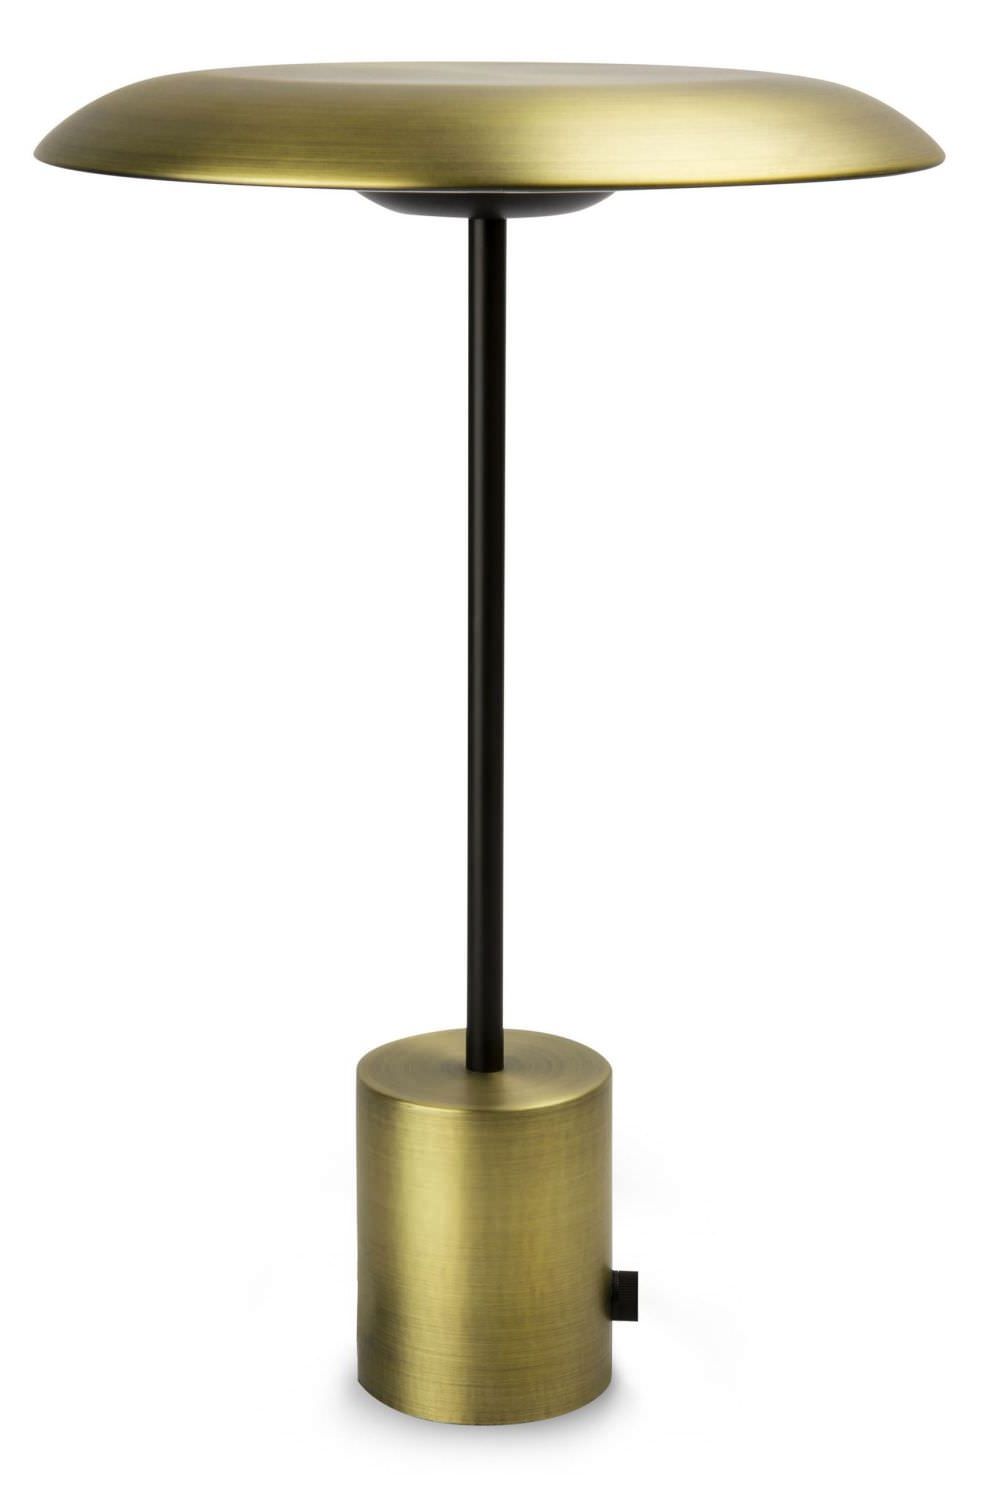 2019 Metal Table Lamp In Gold And Black Mpc 28387 Intended For Satin Gold Outdoor Tables (View 4 of 15)